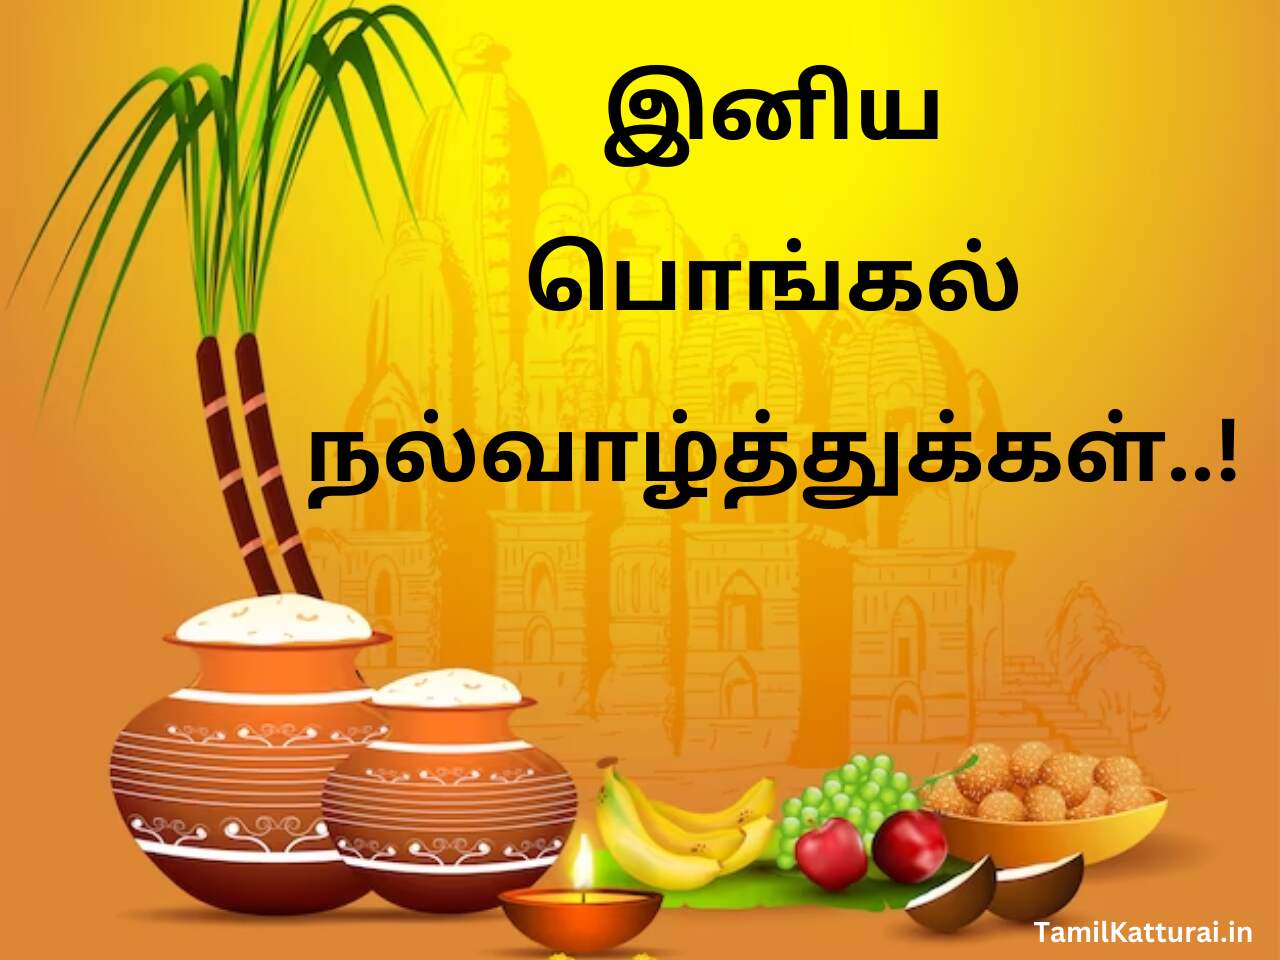 Pongal Wishes in Tamil